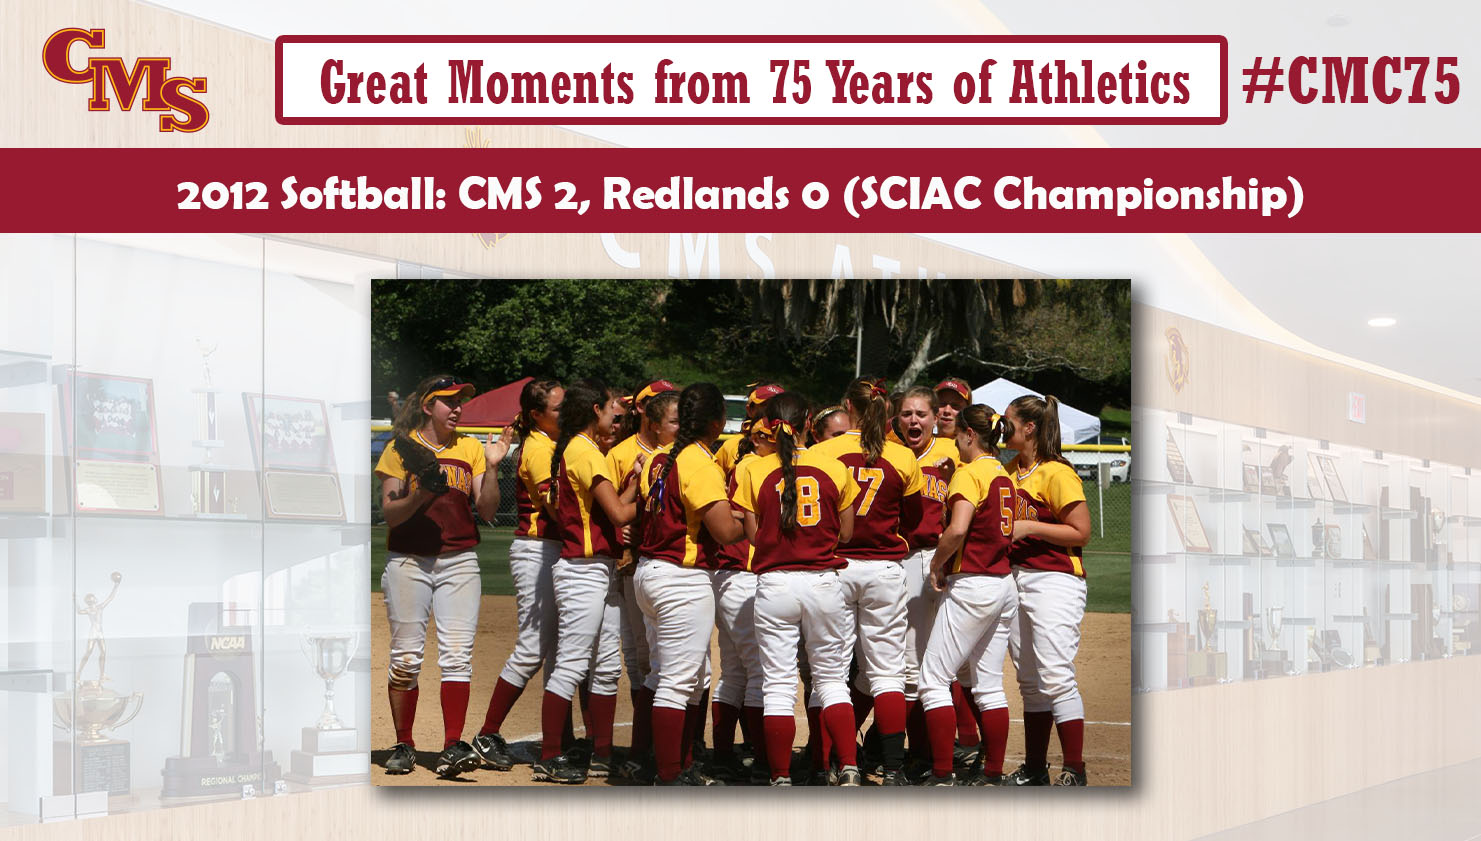 The Athenas celebrating the SCIAC title. Words over the photo read: Great Moments from 75 Years of Athletics. 2012 Softball: CMS 2, Redlands 0 (SCIAC Championship)